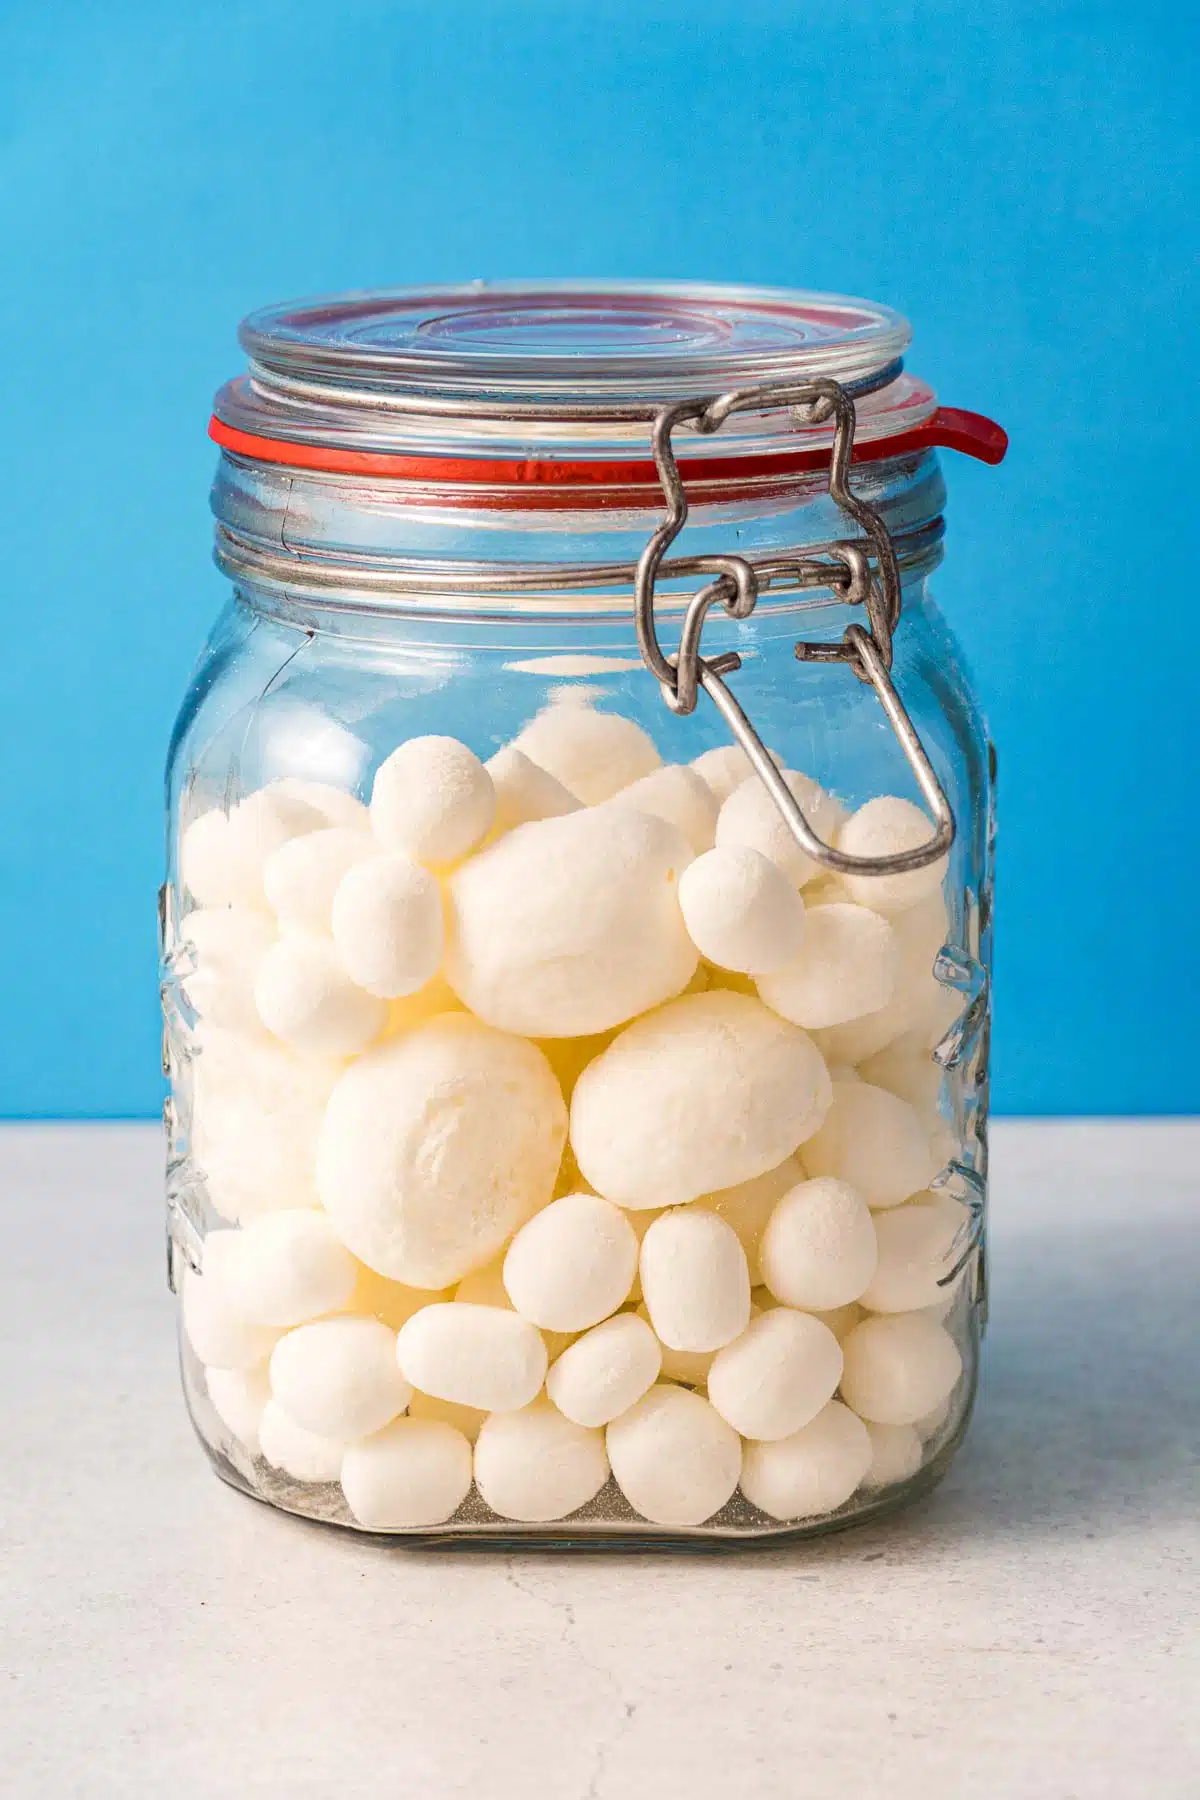 Dehydrated marshmallows in an airtight jar for storage.